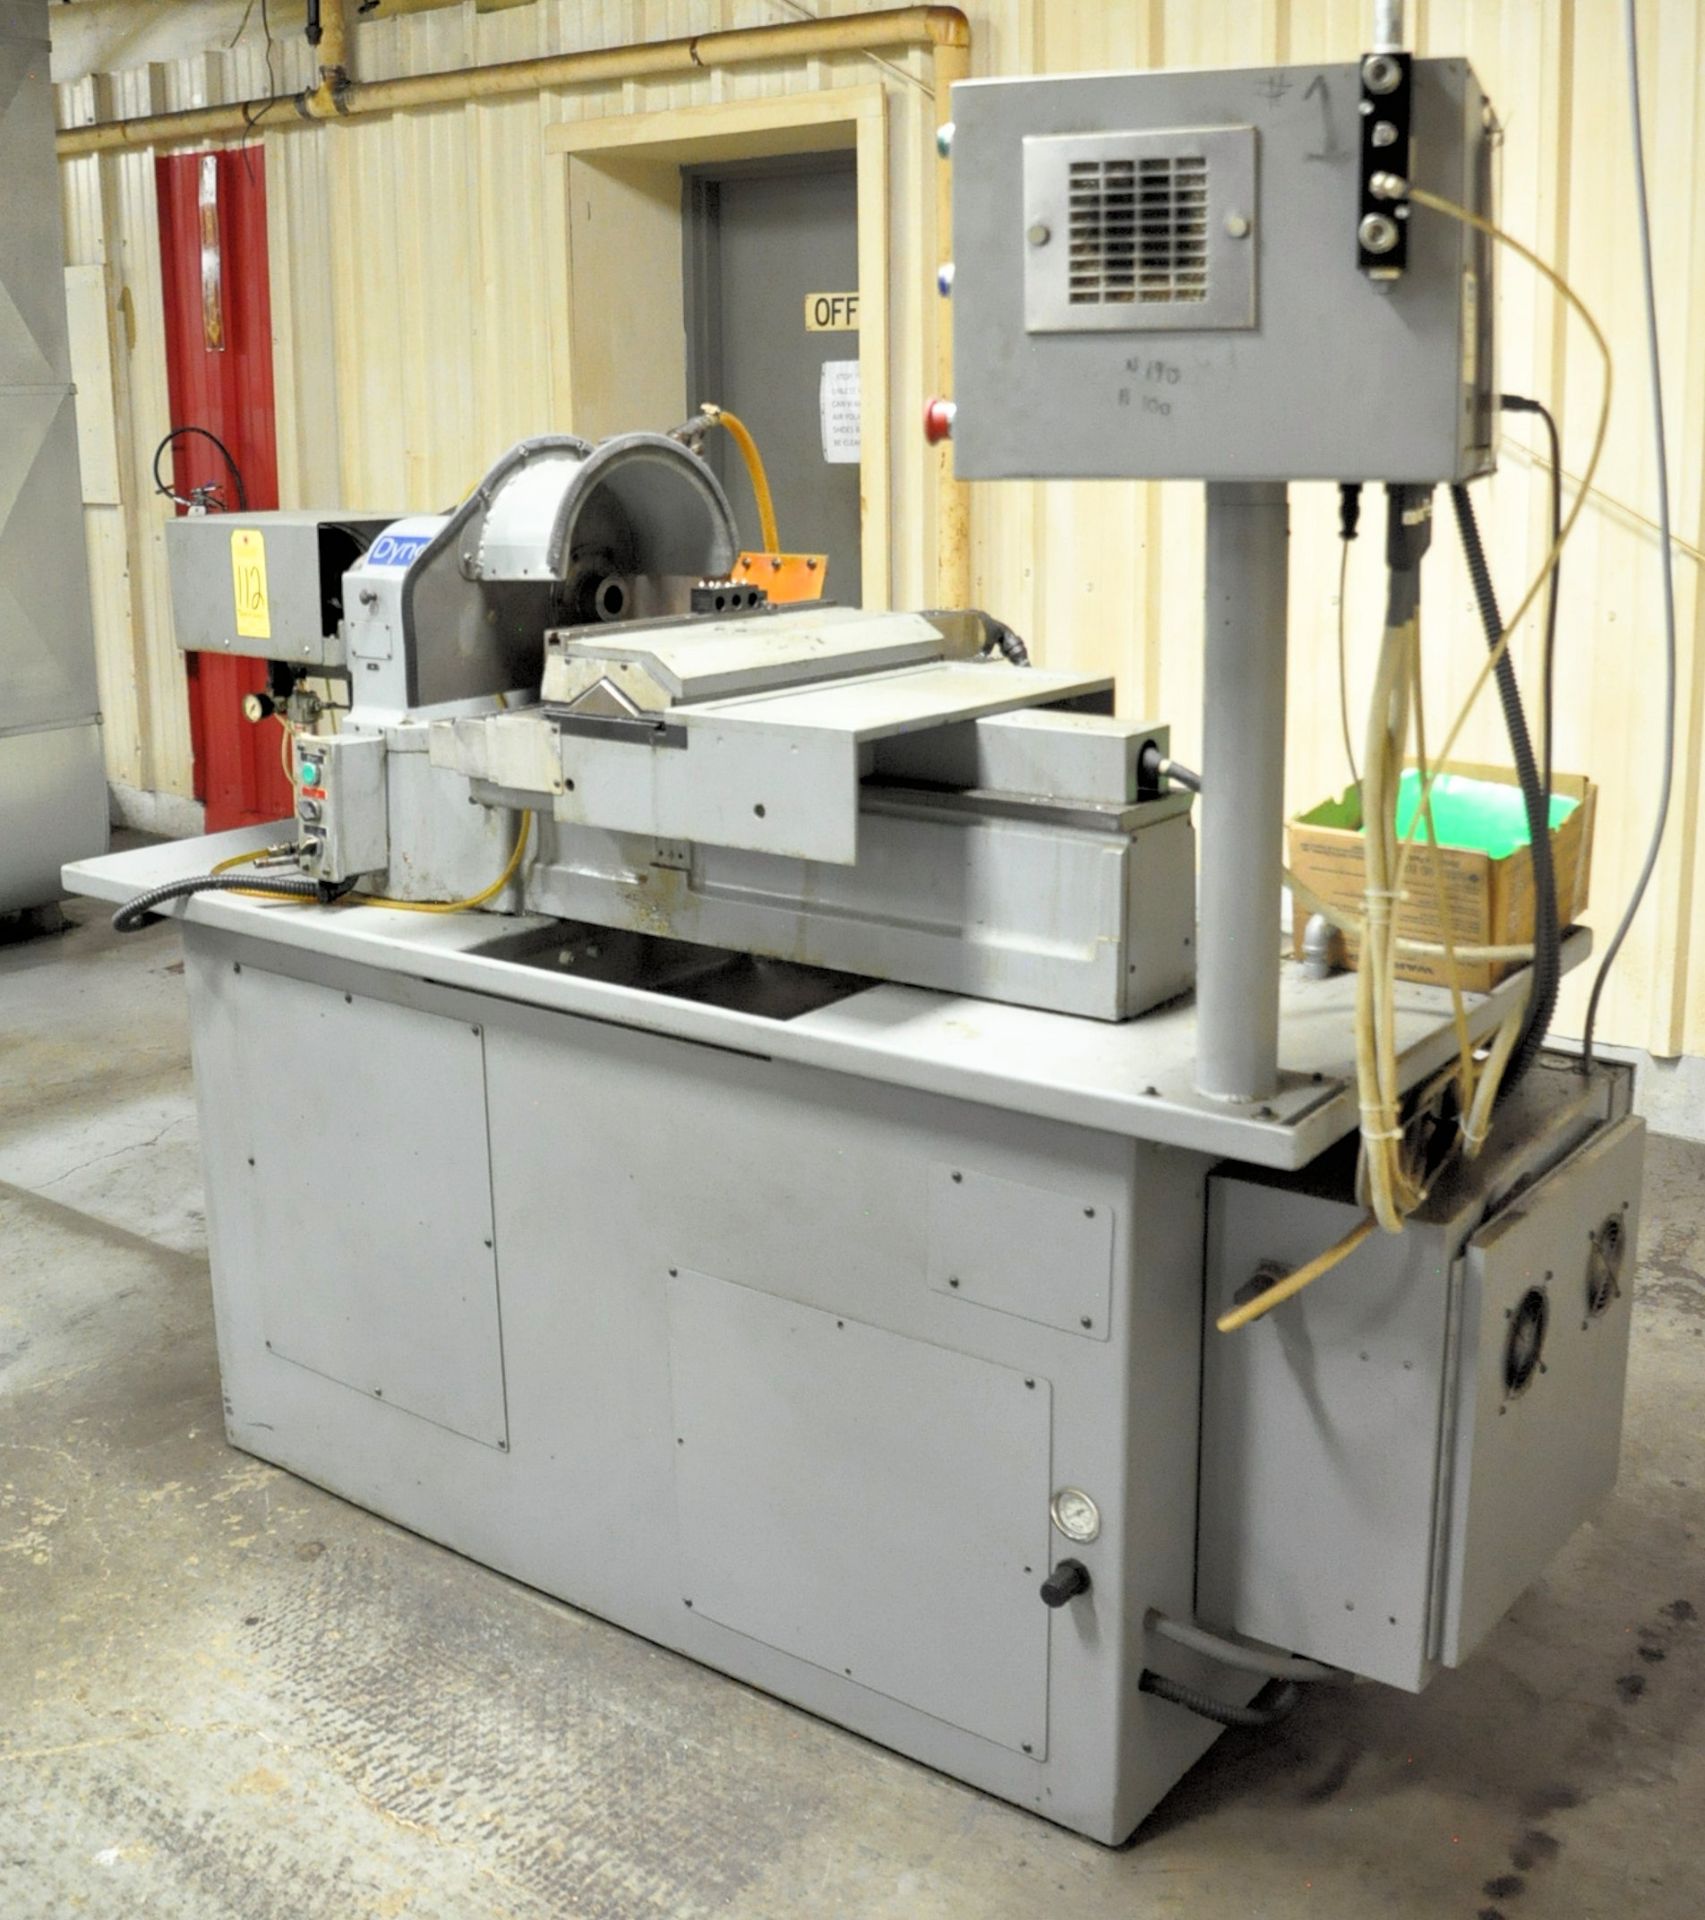 Dynamic Model RS-Accuslide CNC Lathe, S/n DYN-RS-123211-45, Fagor CNC Controller, 2-Axis - Image 3 of 7